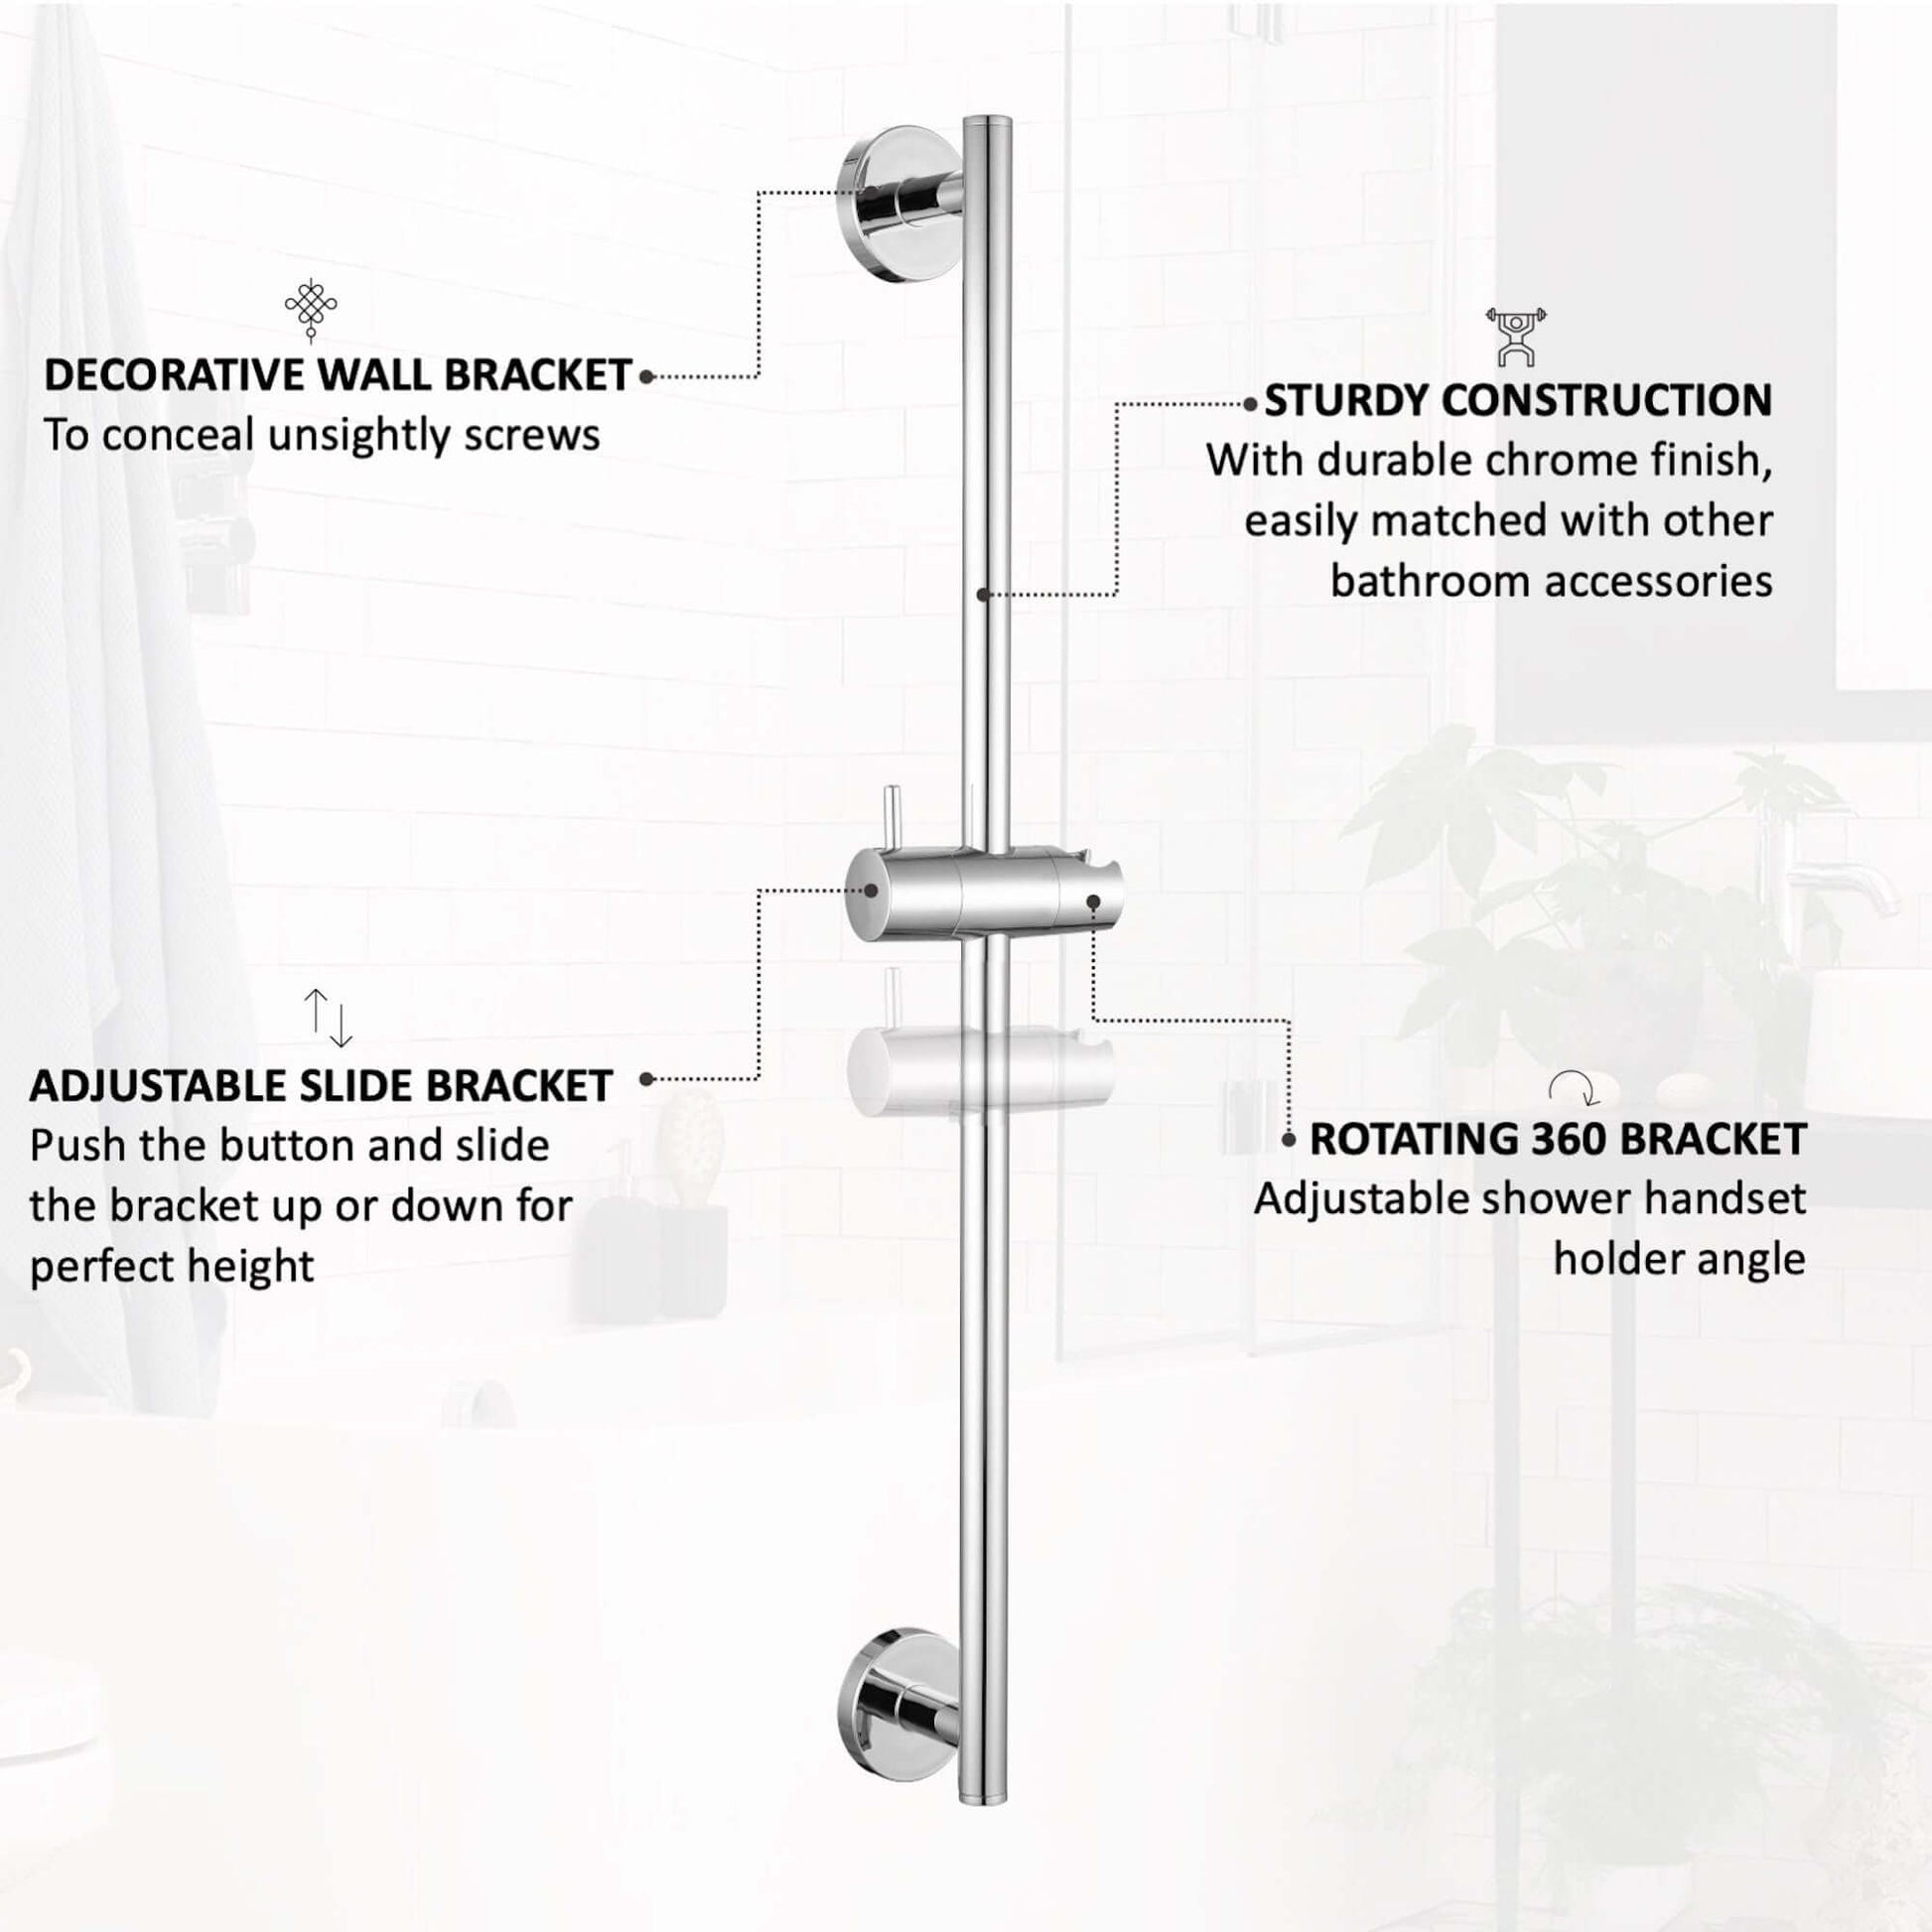 Dune contemporary thermostatic shower mixer bar valve with slider rail kit - chrome - Showers